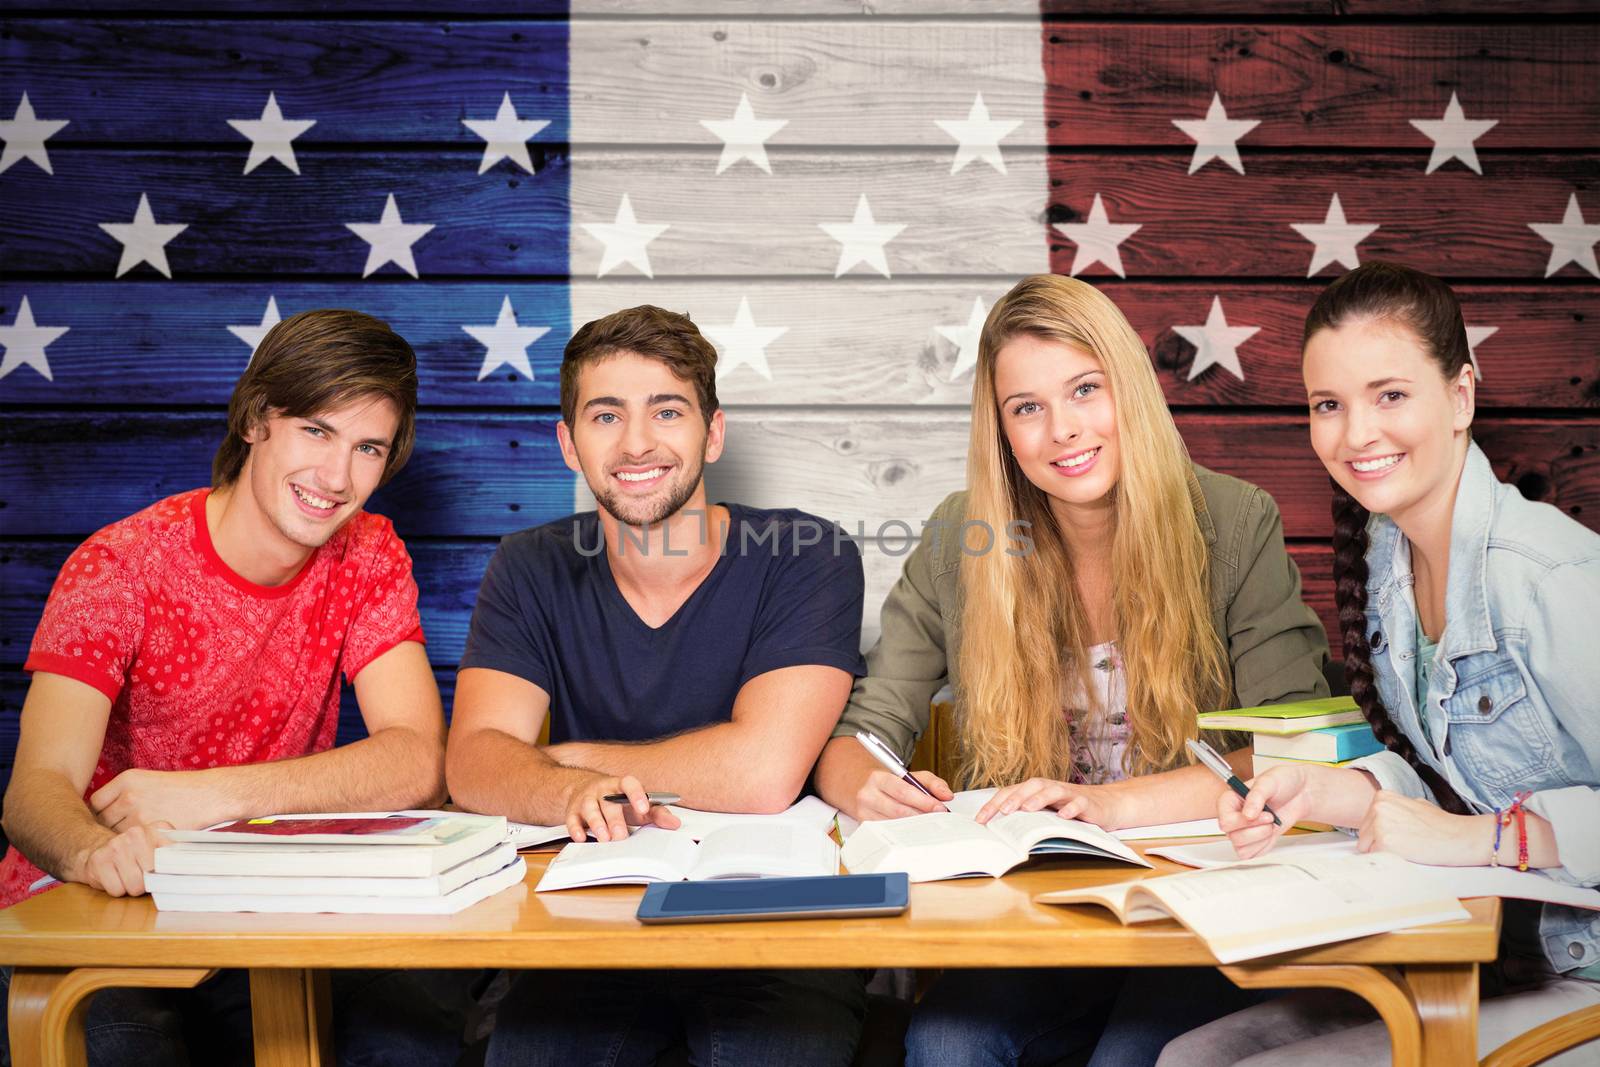 Students studying against composite image of usa national flag